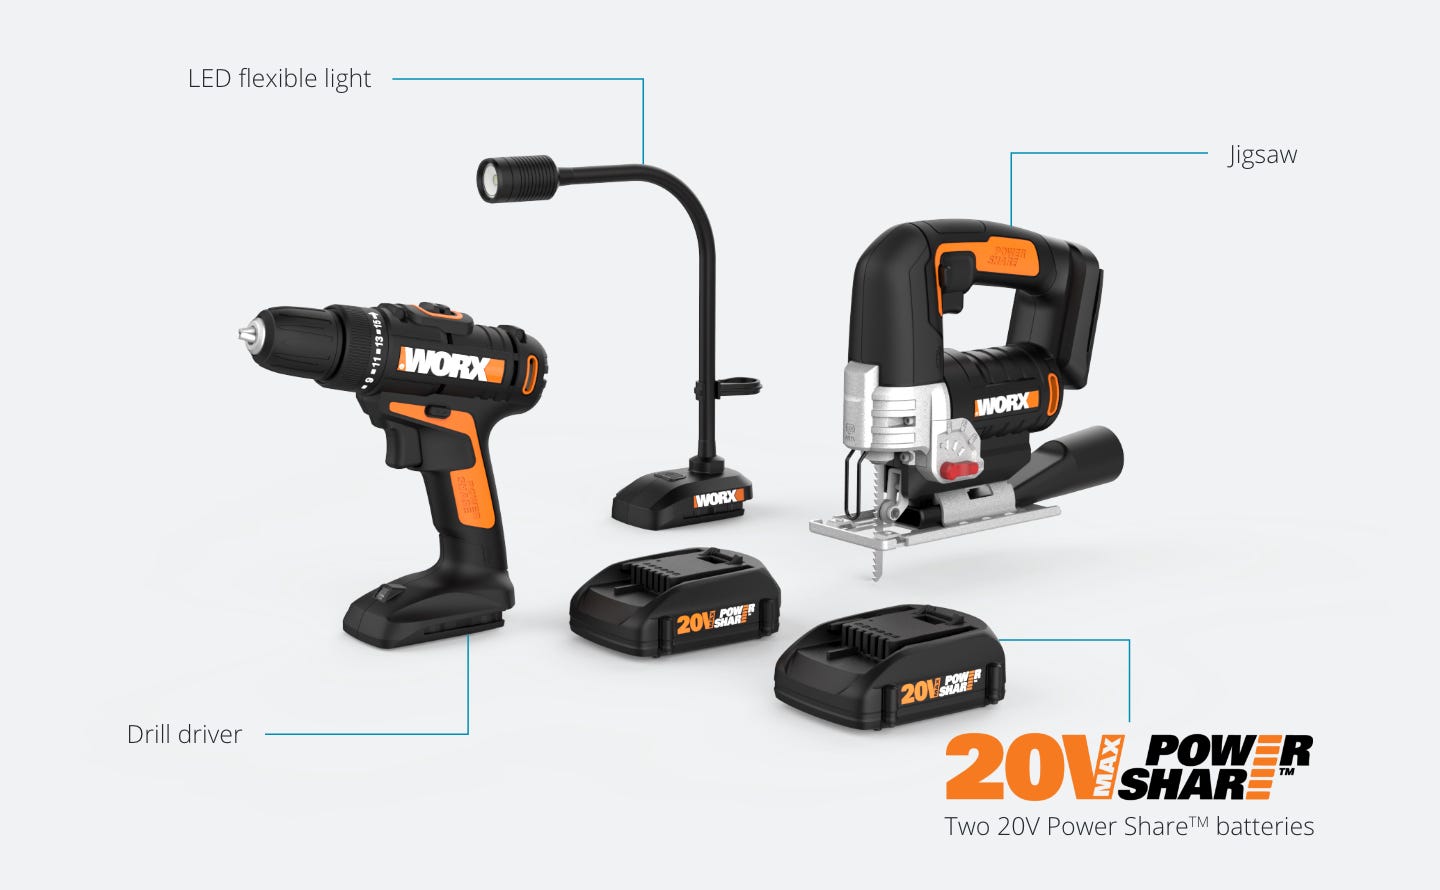 combo kit featuring: drill/driver, LED flexible light, jigsaw, and two 20V power Share batteries